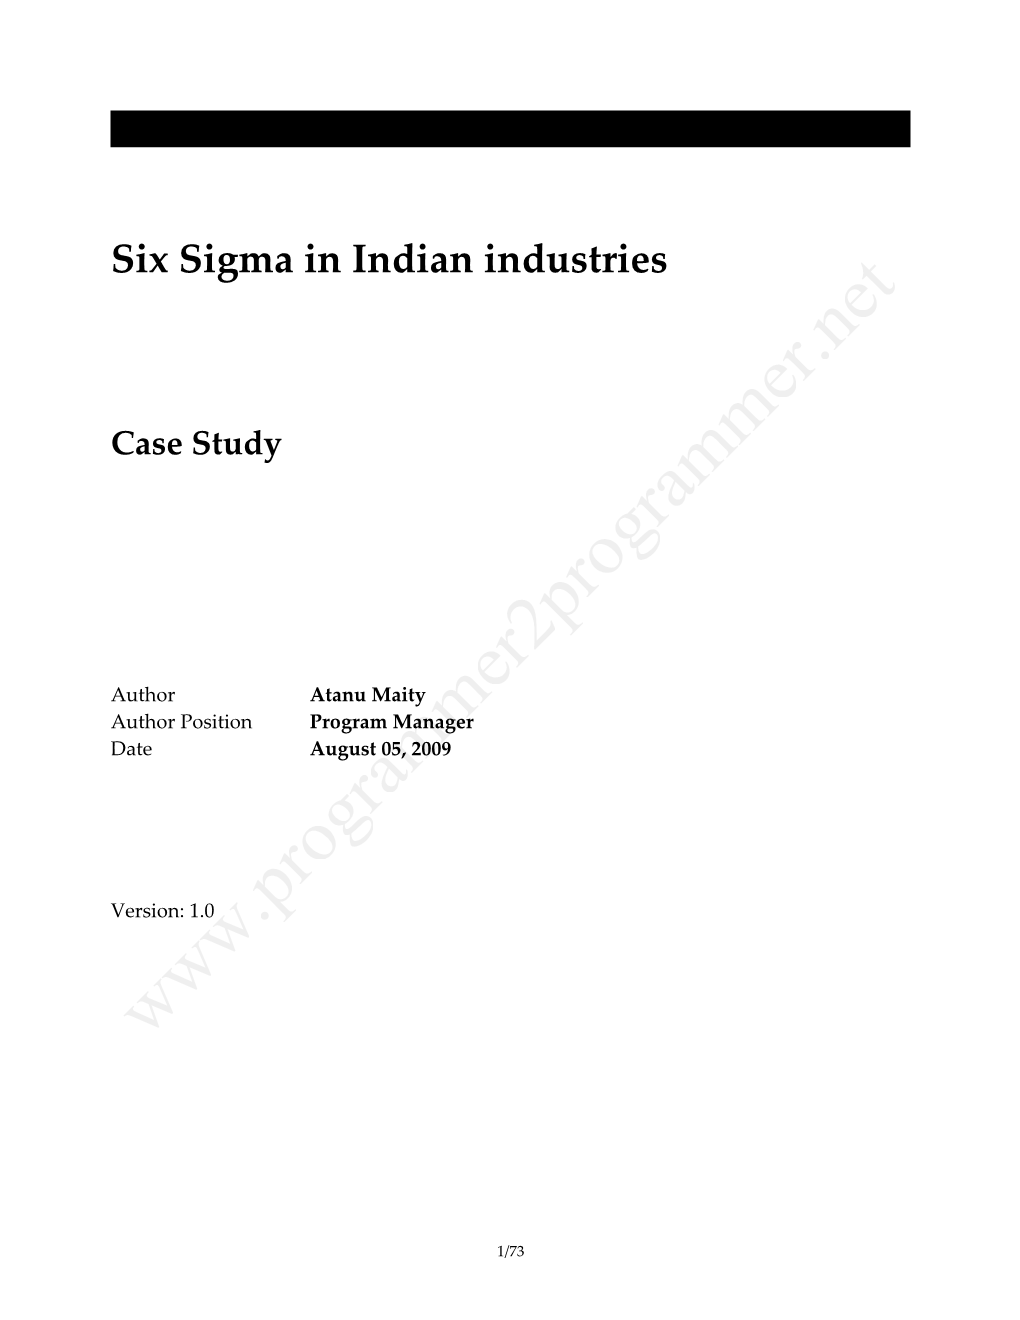 Six Sigma in Indian Industries